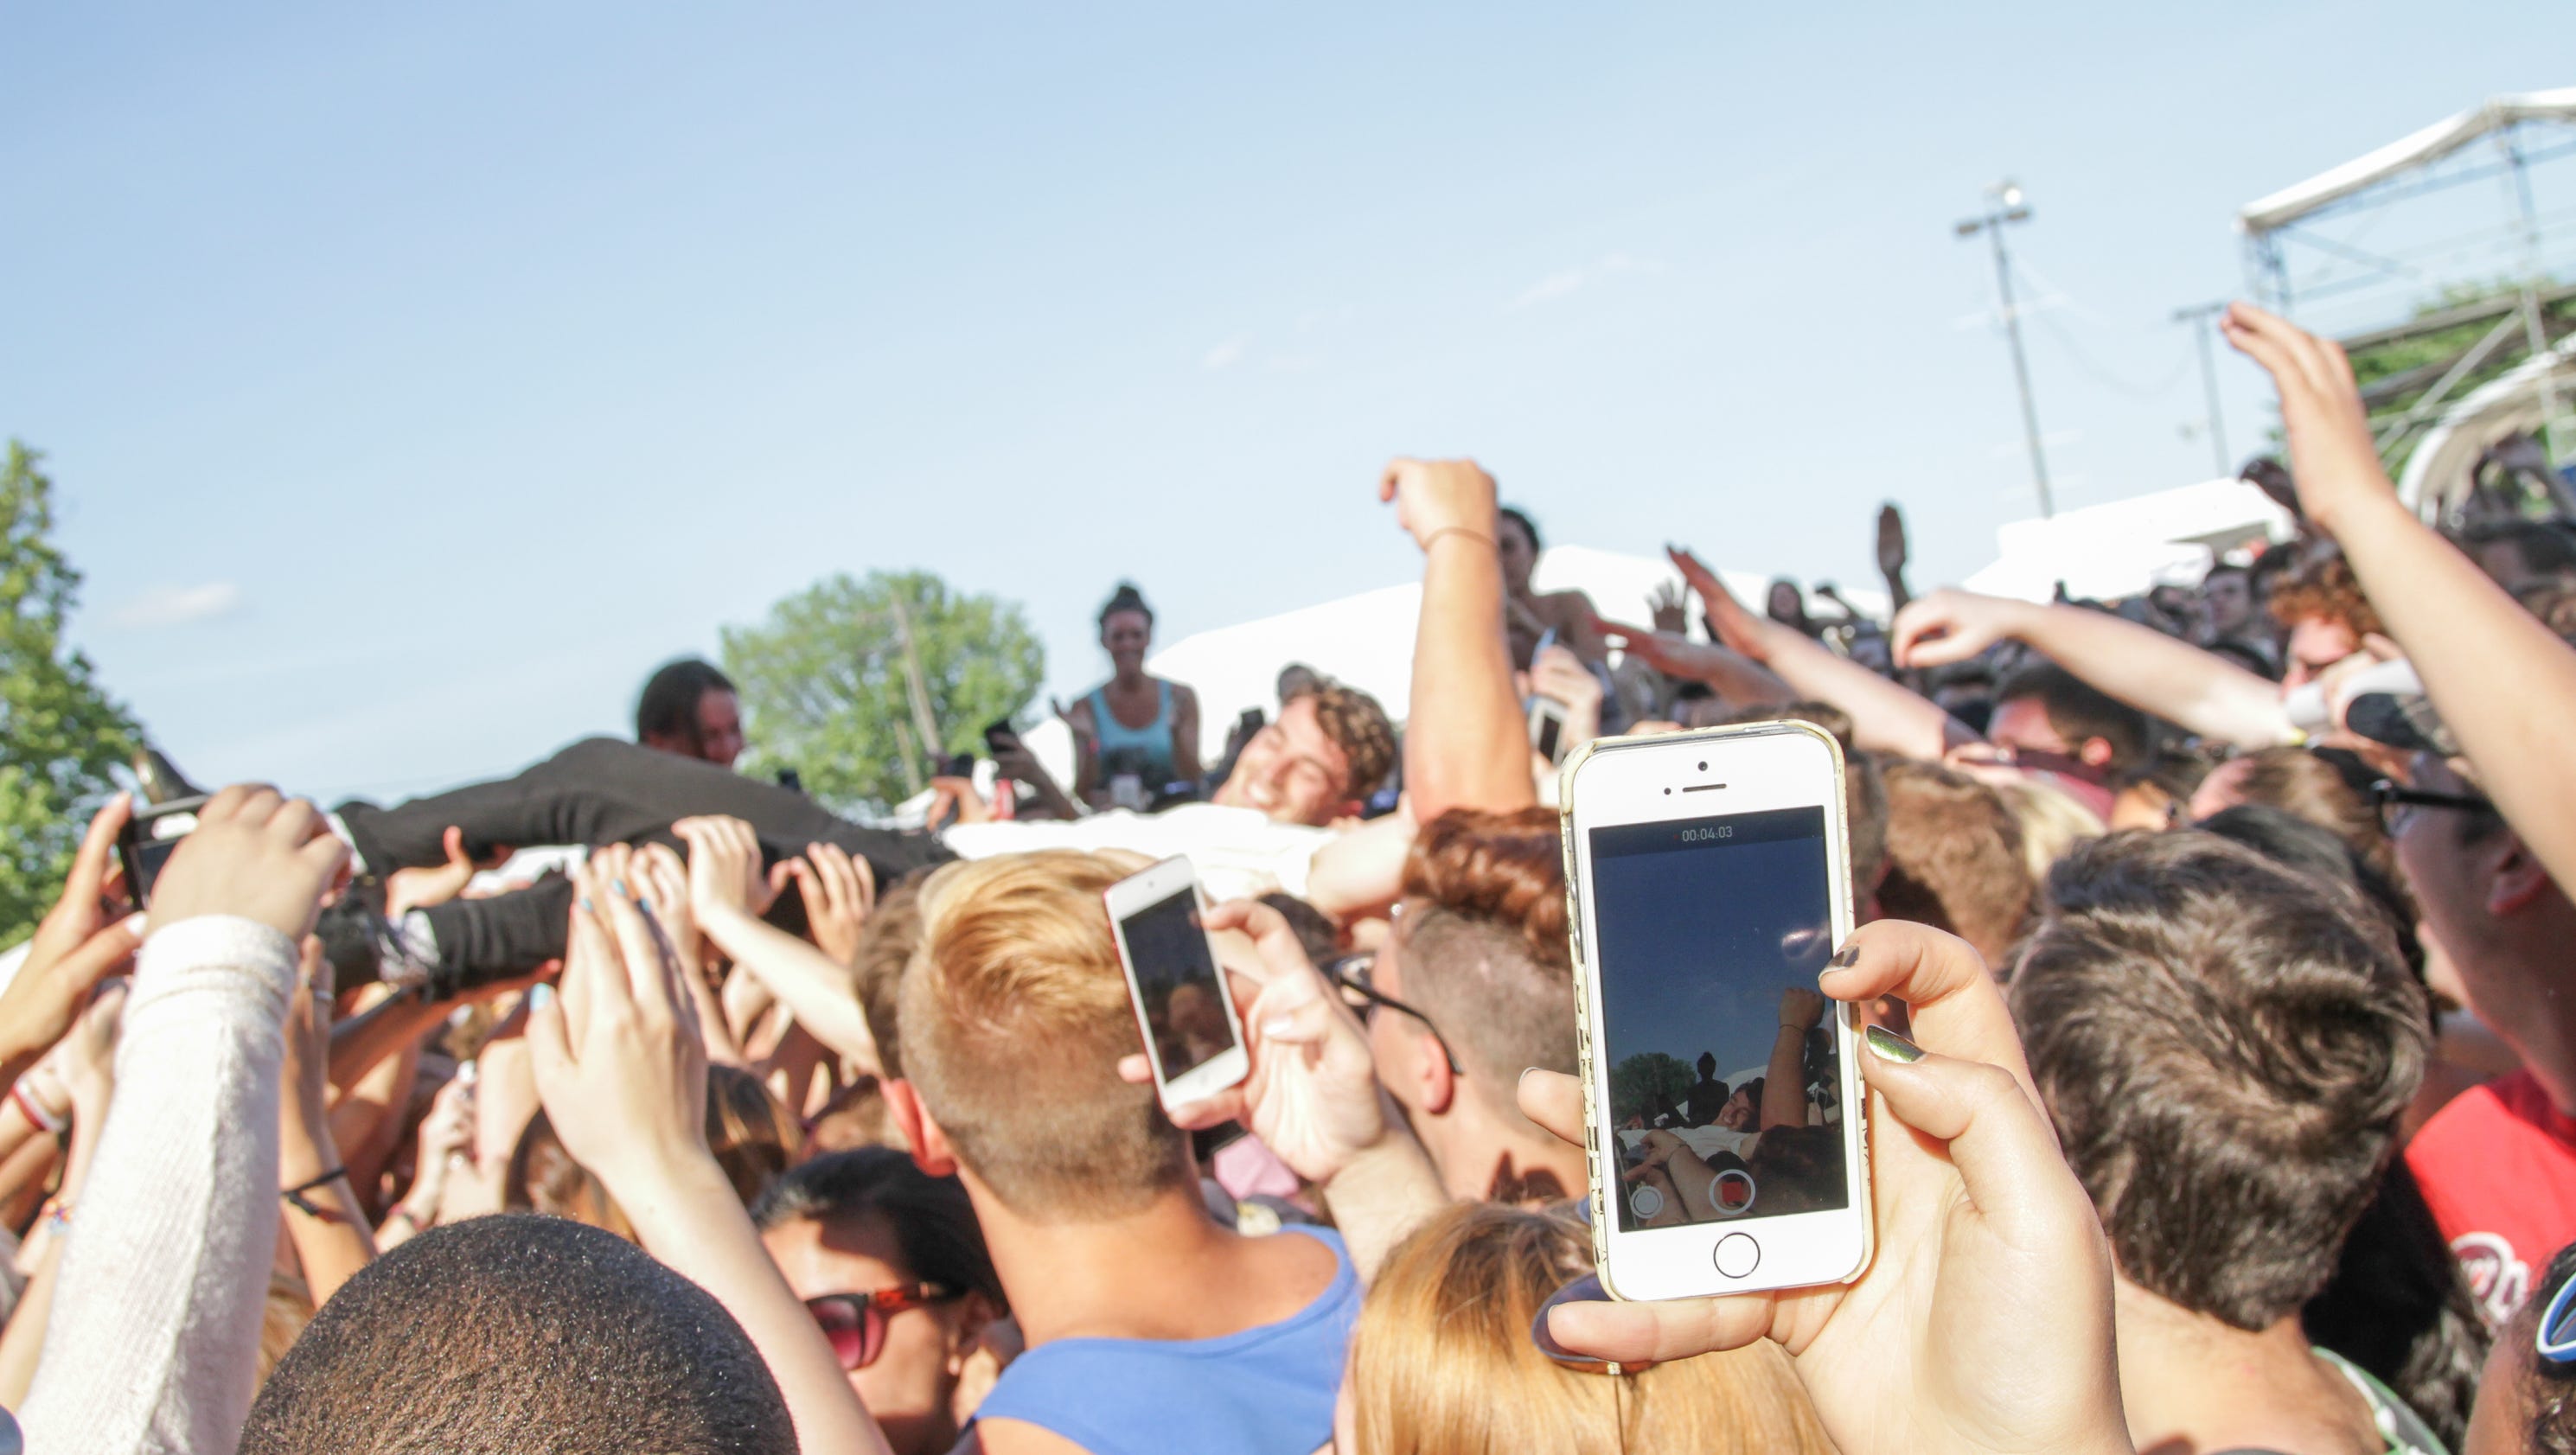 Not your average Radio 104.5 Summer Block Party